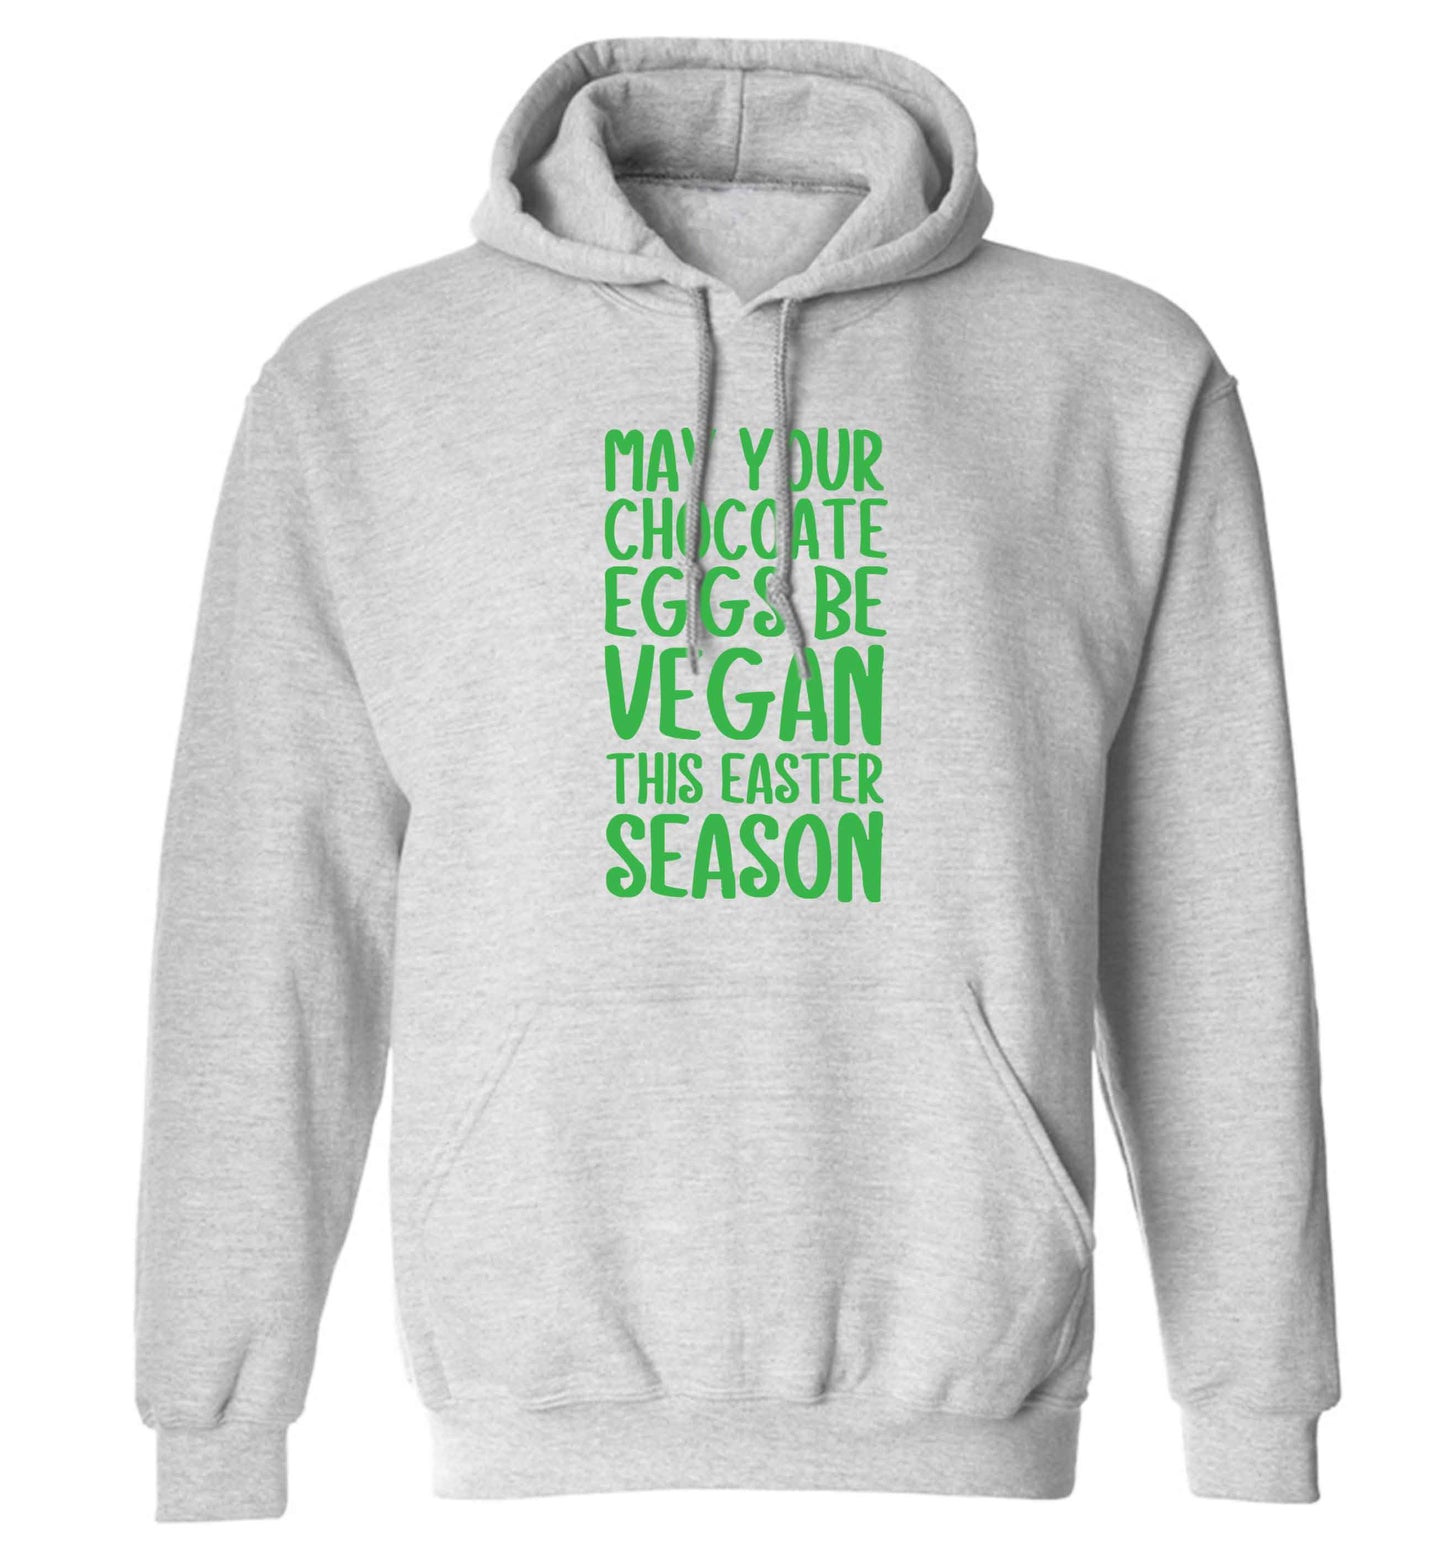 Easter bunny approved! Vegans will love this easter themed adults unisex grey hoodie 2XL